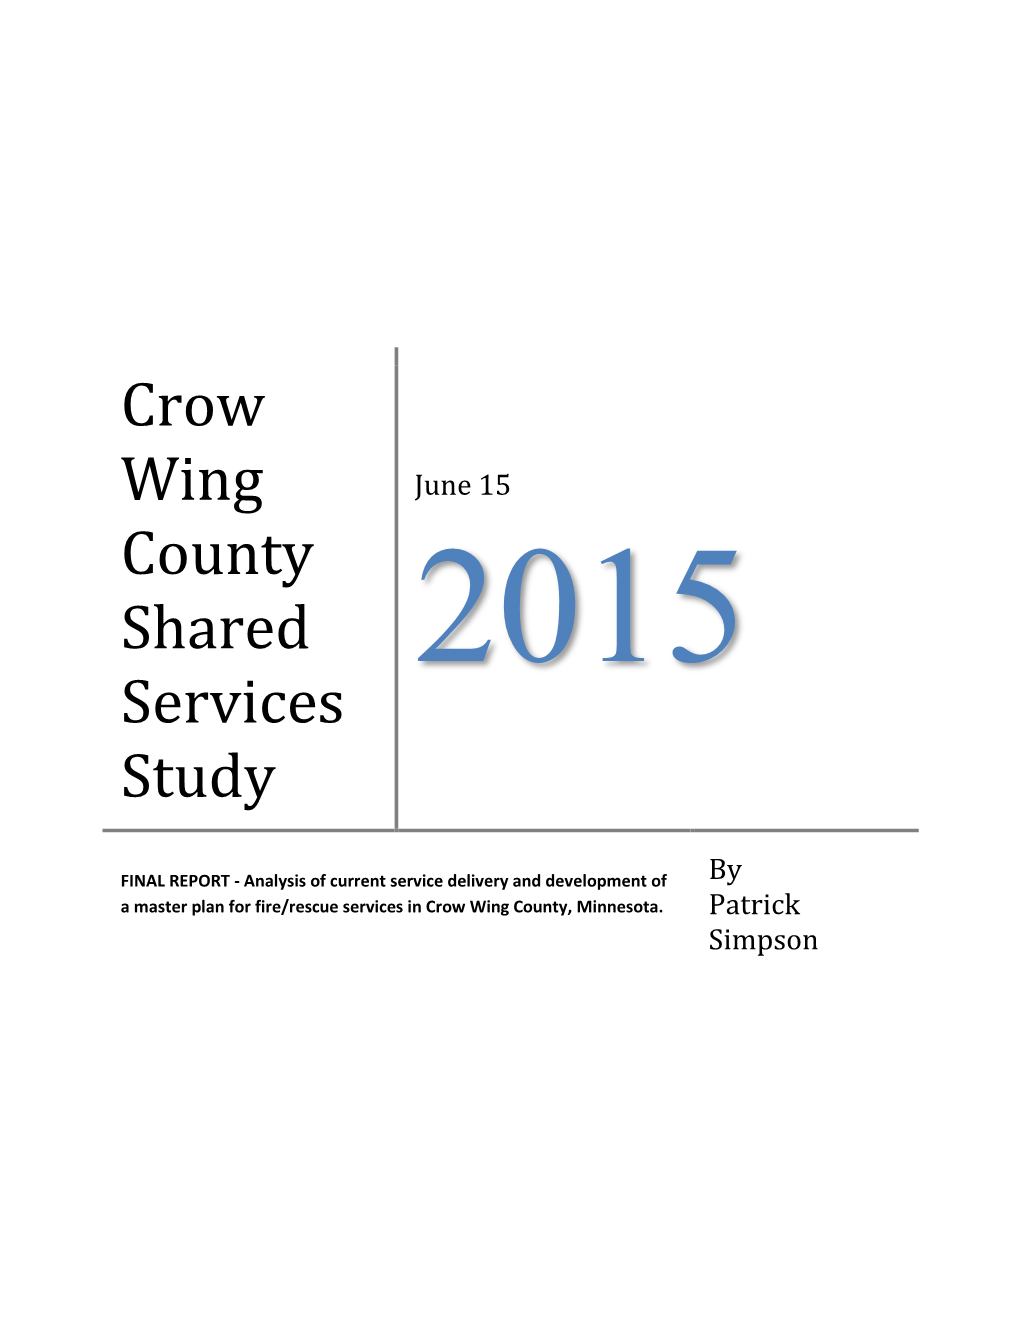 Crow Wing County Shared Services Study